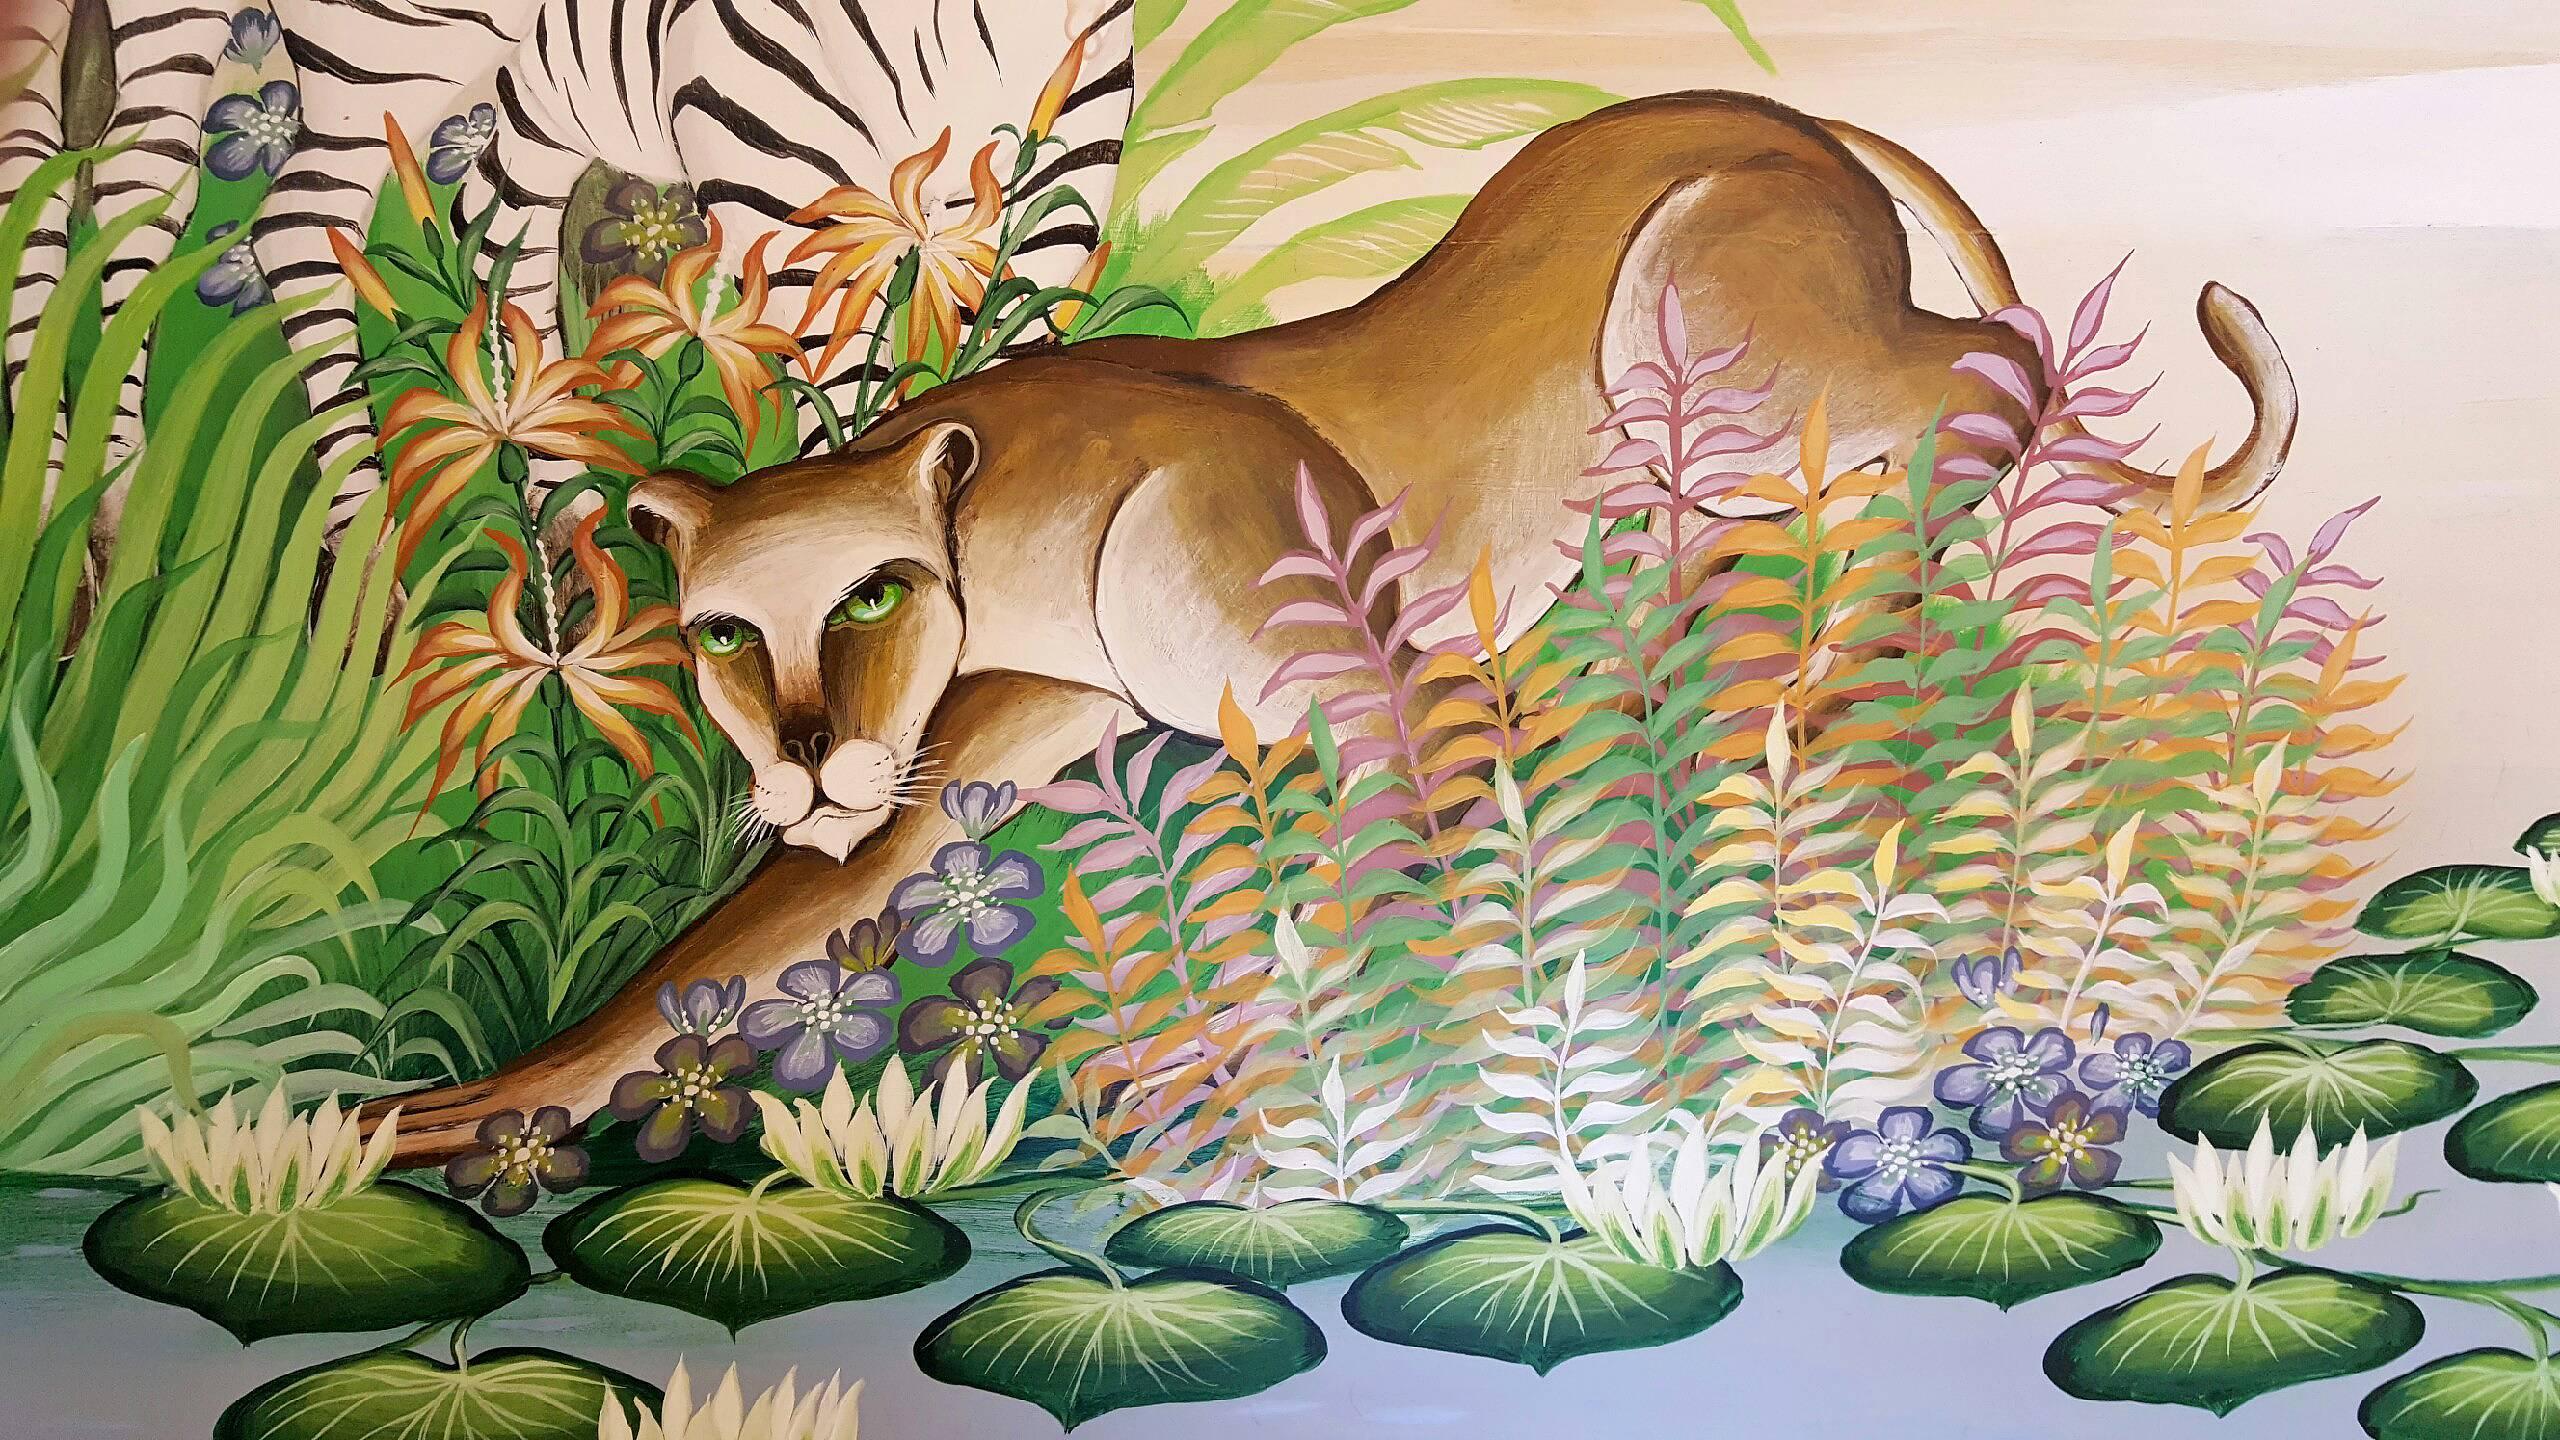 Tropical Jungle,  Tiger, Zebra, Leopard, Jungle  Animals  Panther - Gray Landscape Painting by Gustavo Novoa